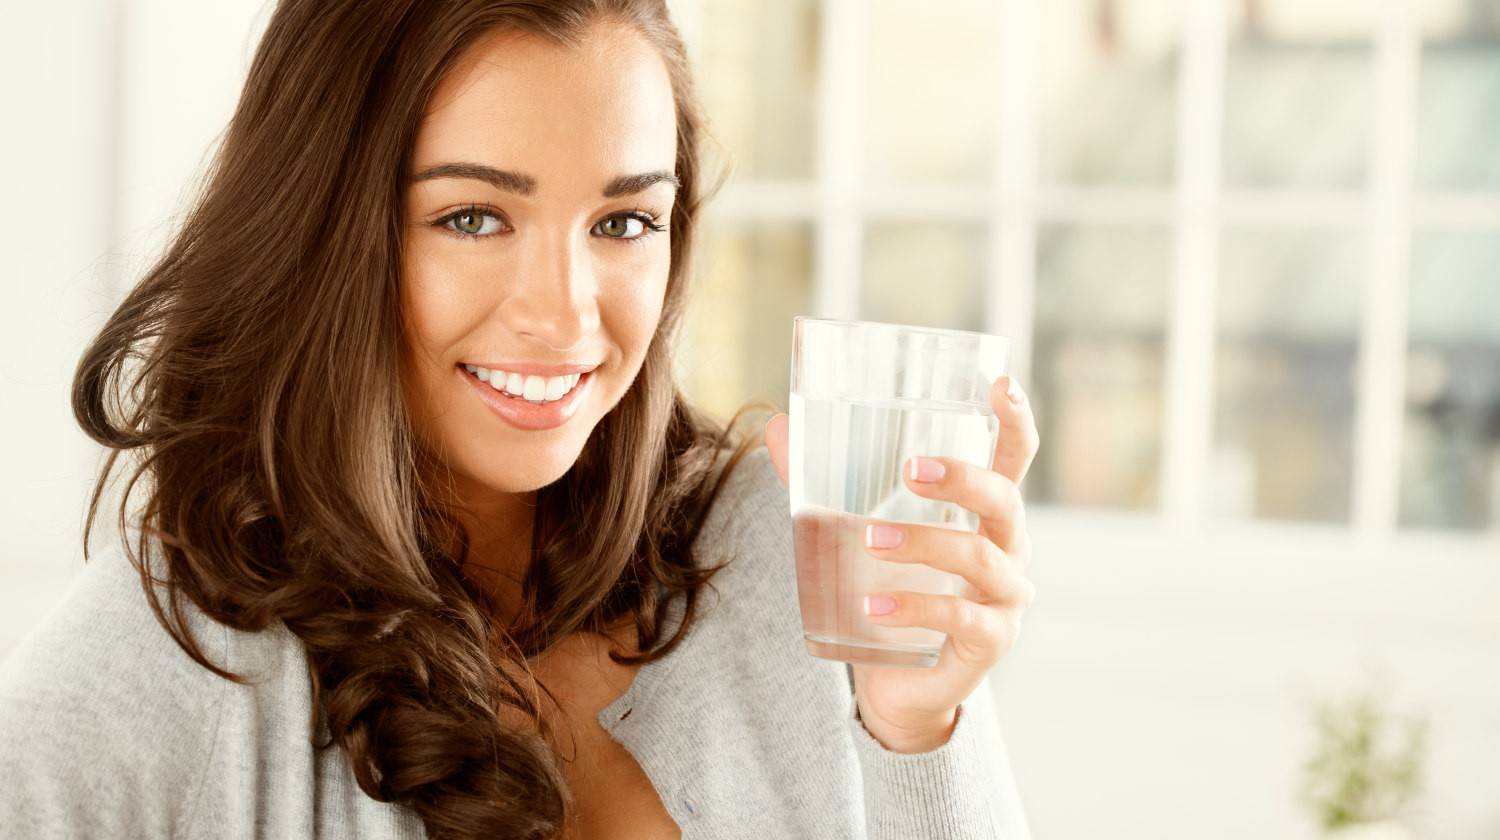 7 Health Benefits Of Morning Water Therapy